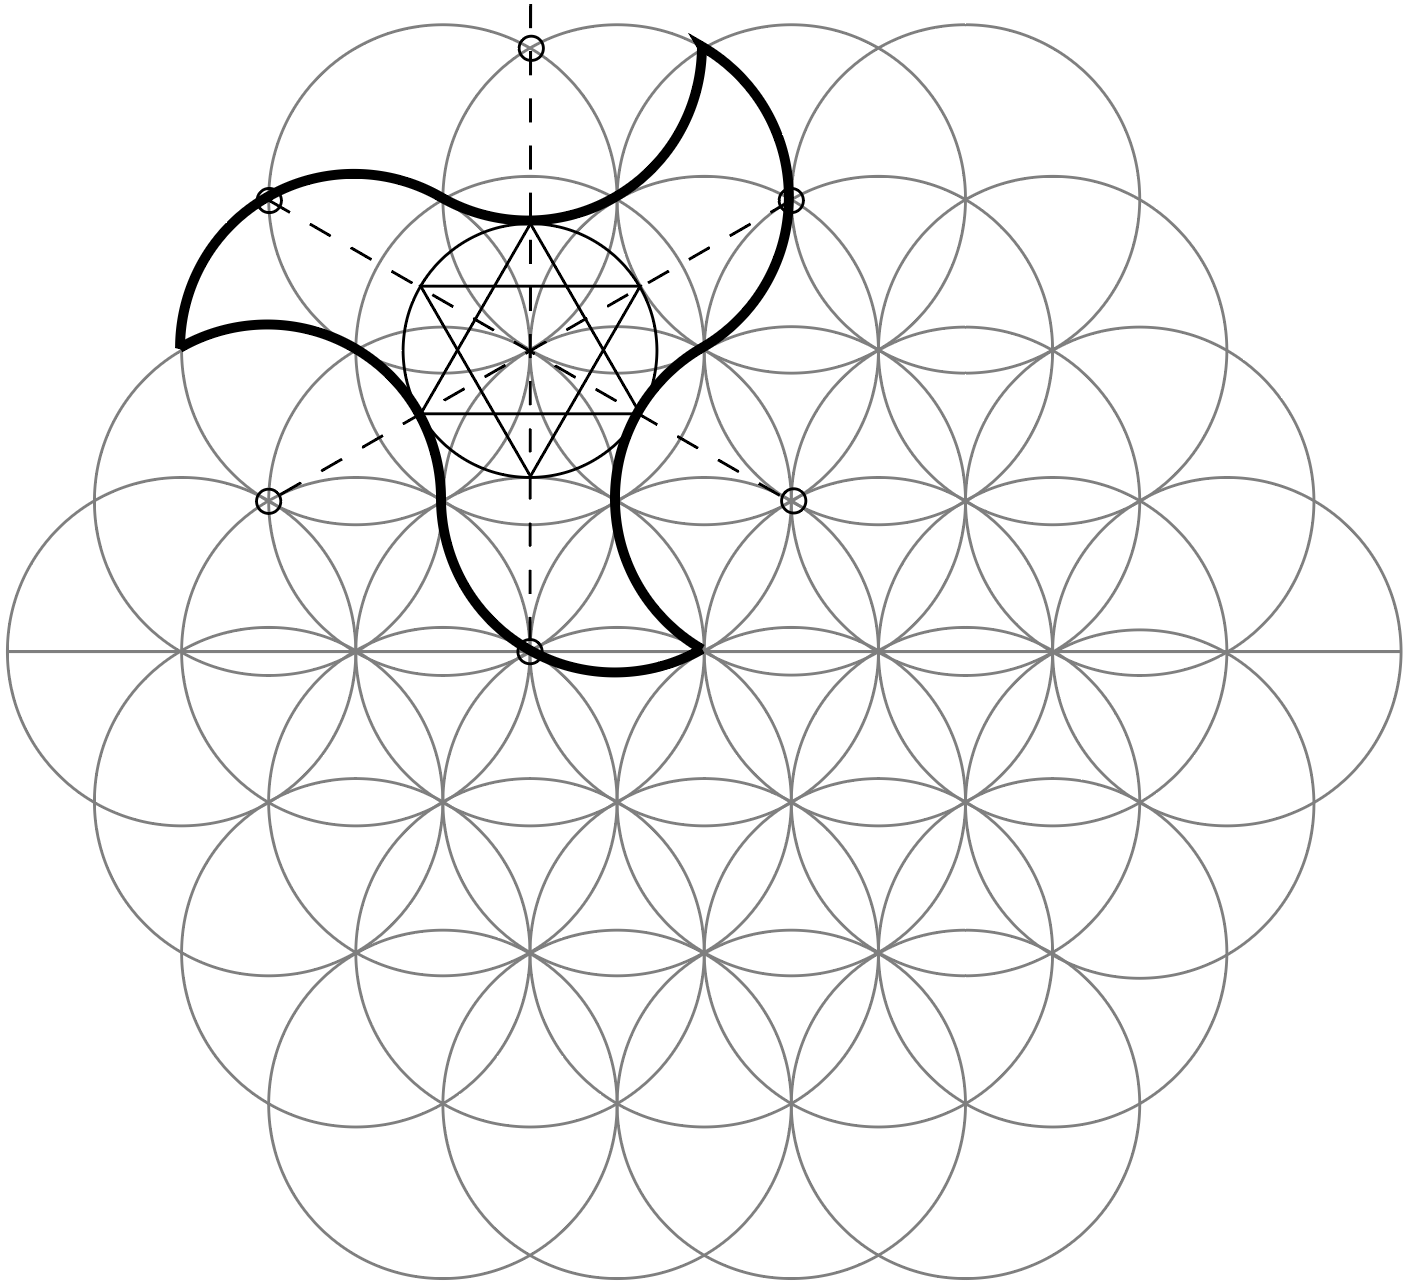 17. Using a central proportioning circle, Radius R2, as in step 7, add radial divisions to produce hexagrams and/or hexagons both within and between the pajaritas.